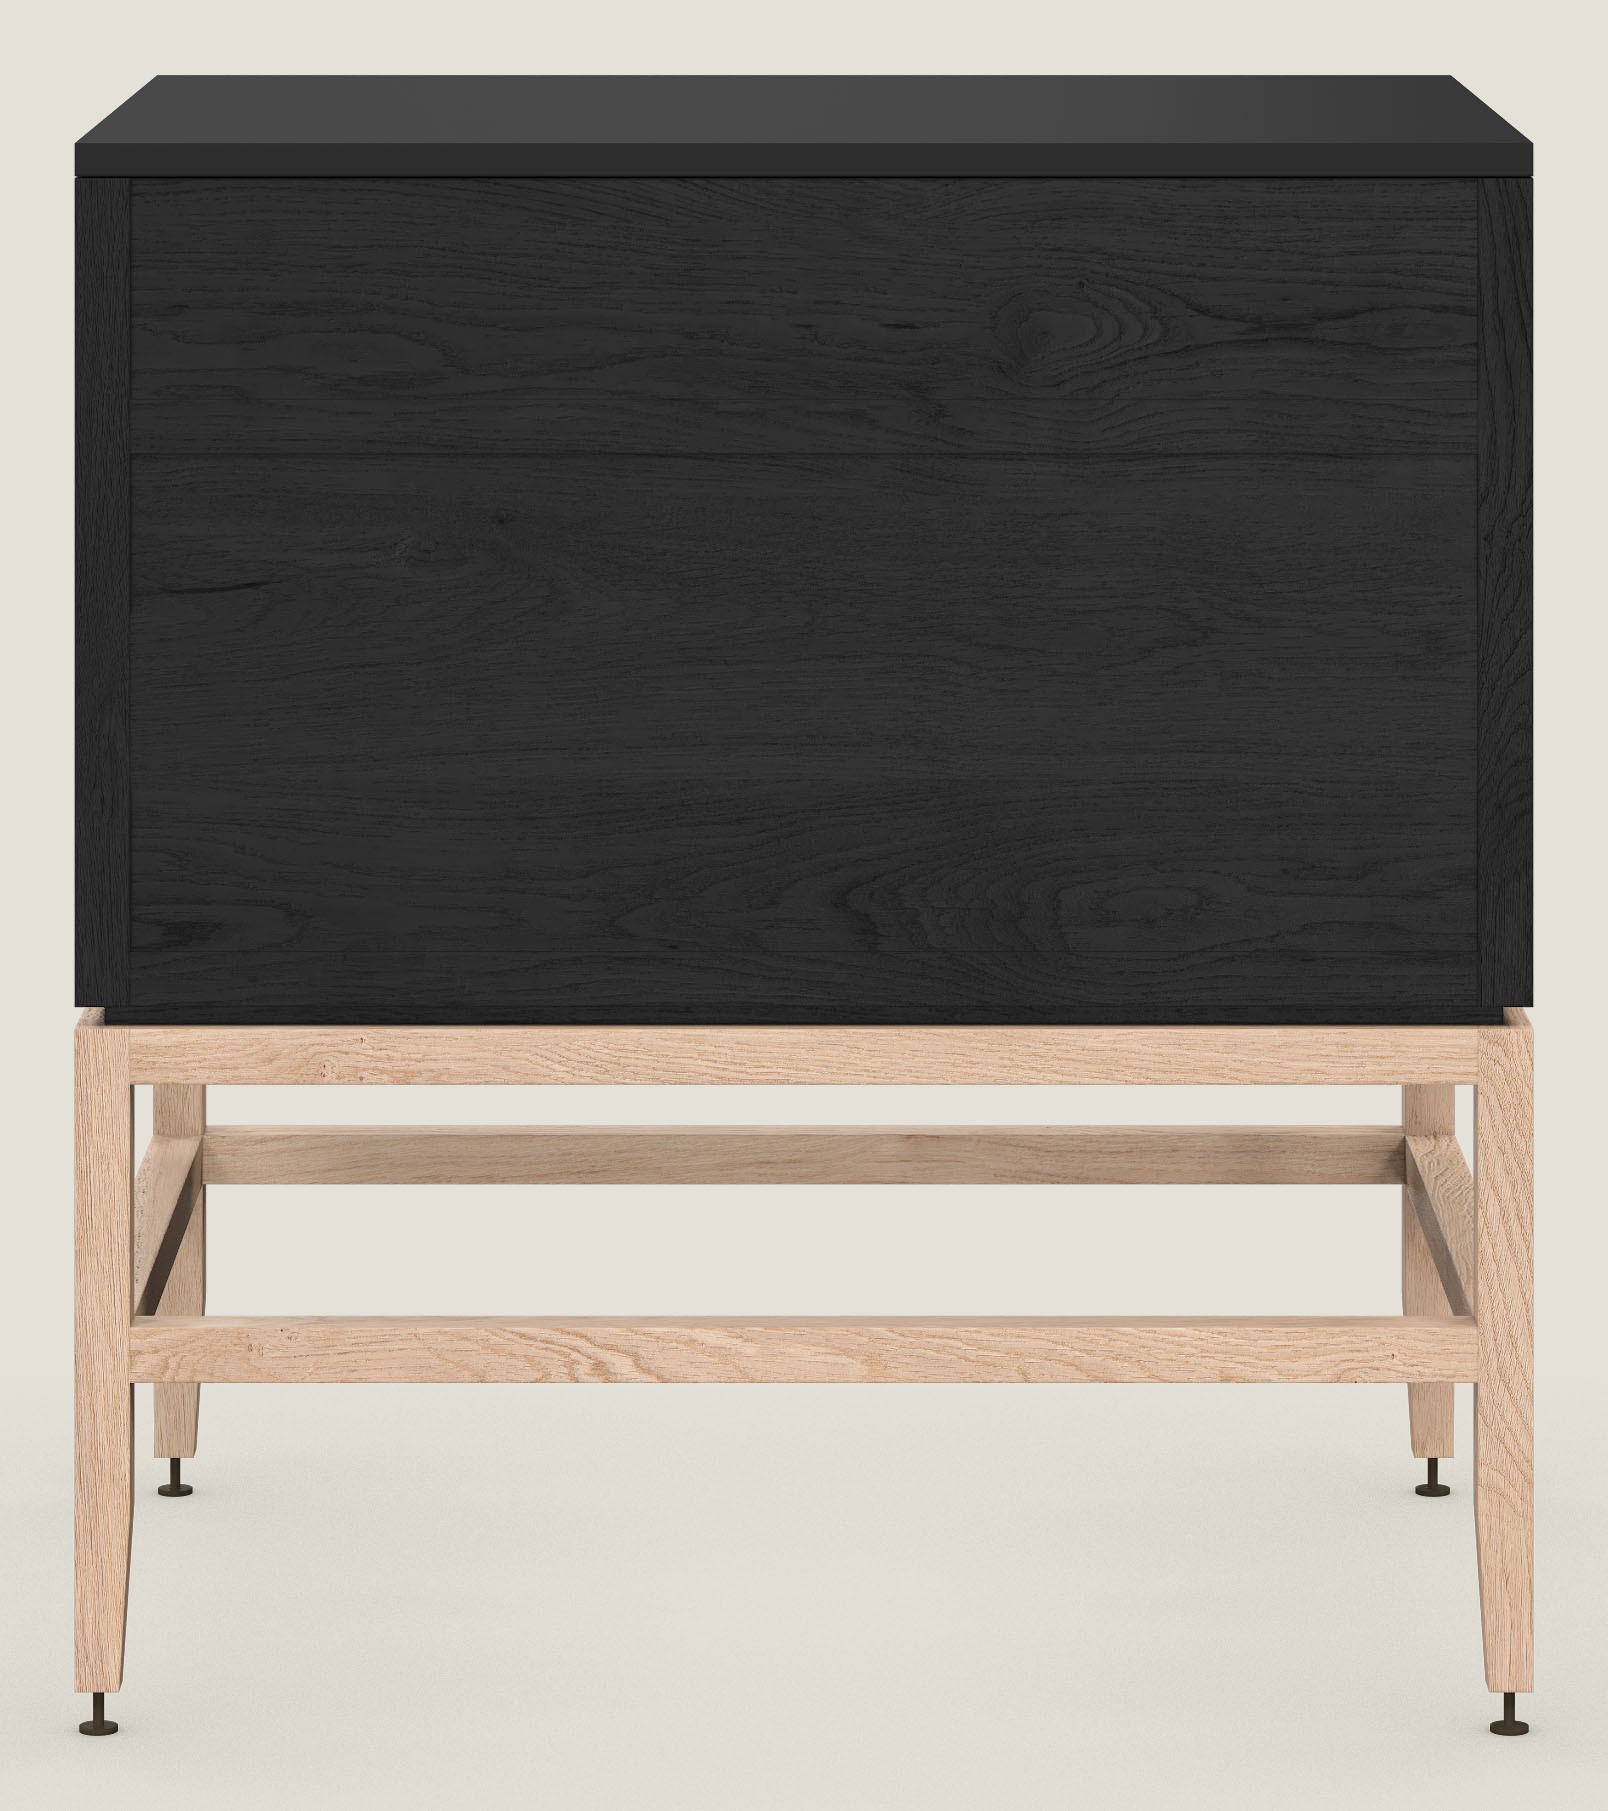 Coquo modular kitchen cabinet with two drawers in black stained oak and natural oak with metal handles.
